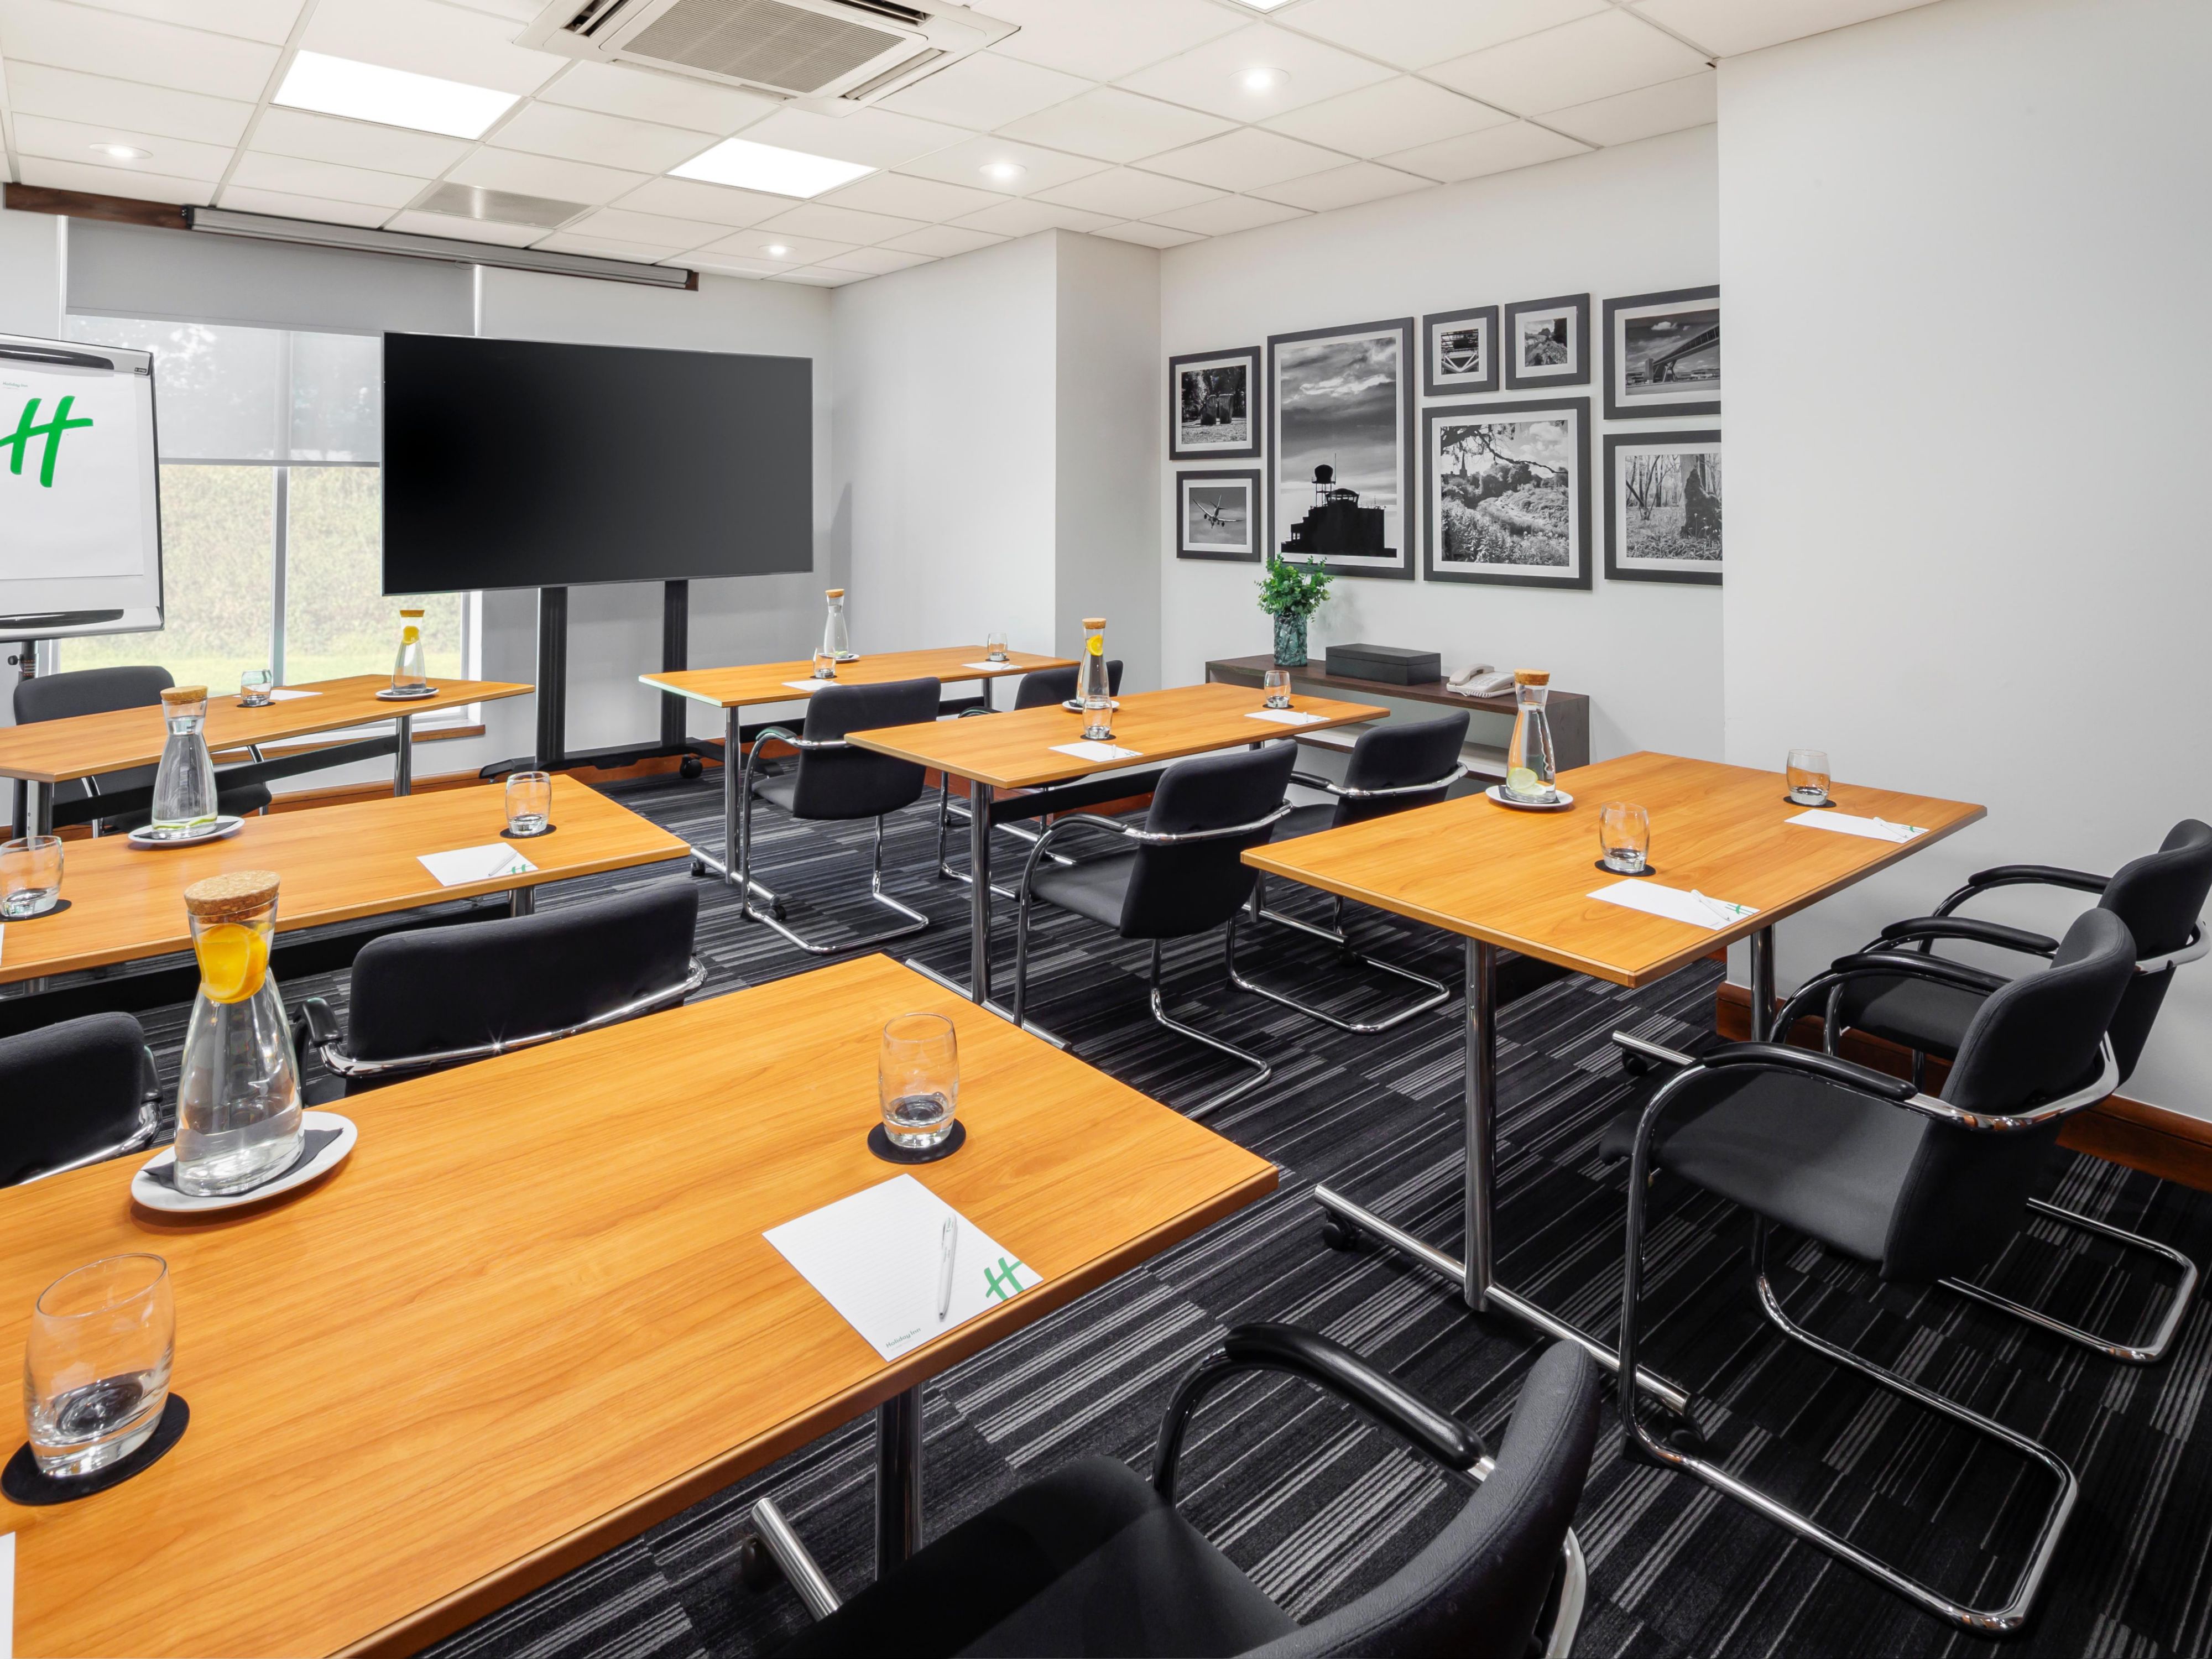 Elevate your next event at Holiday Inn London - Gatwick Airport! Enquire online for unbeatable conference and event experiences for up to 220 guests!